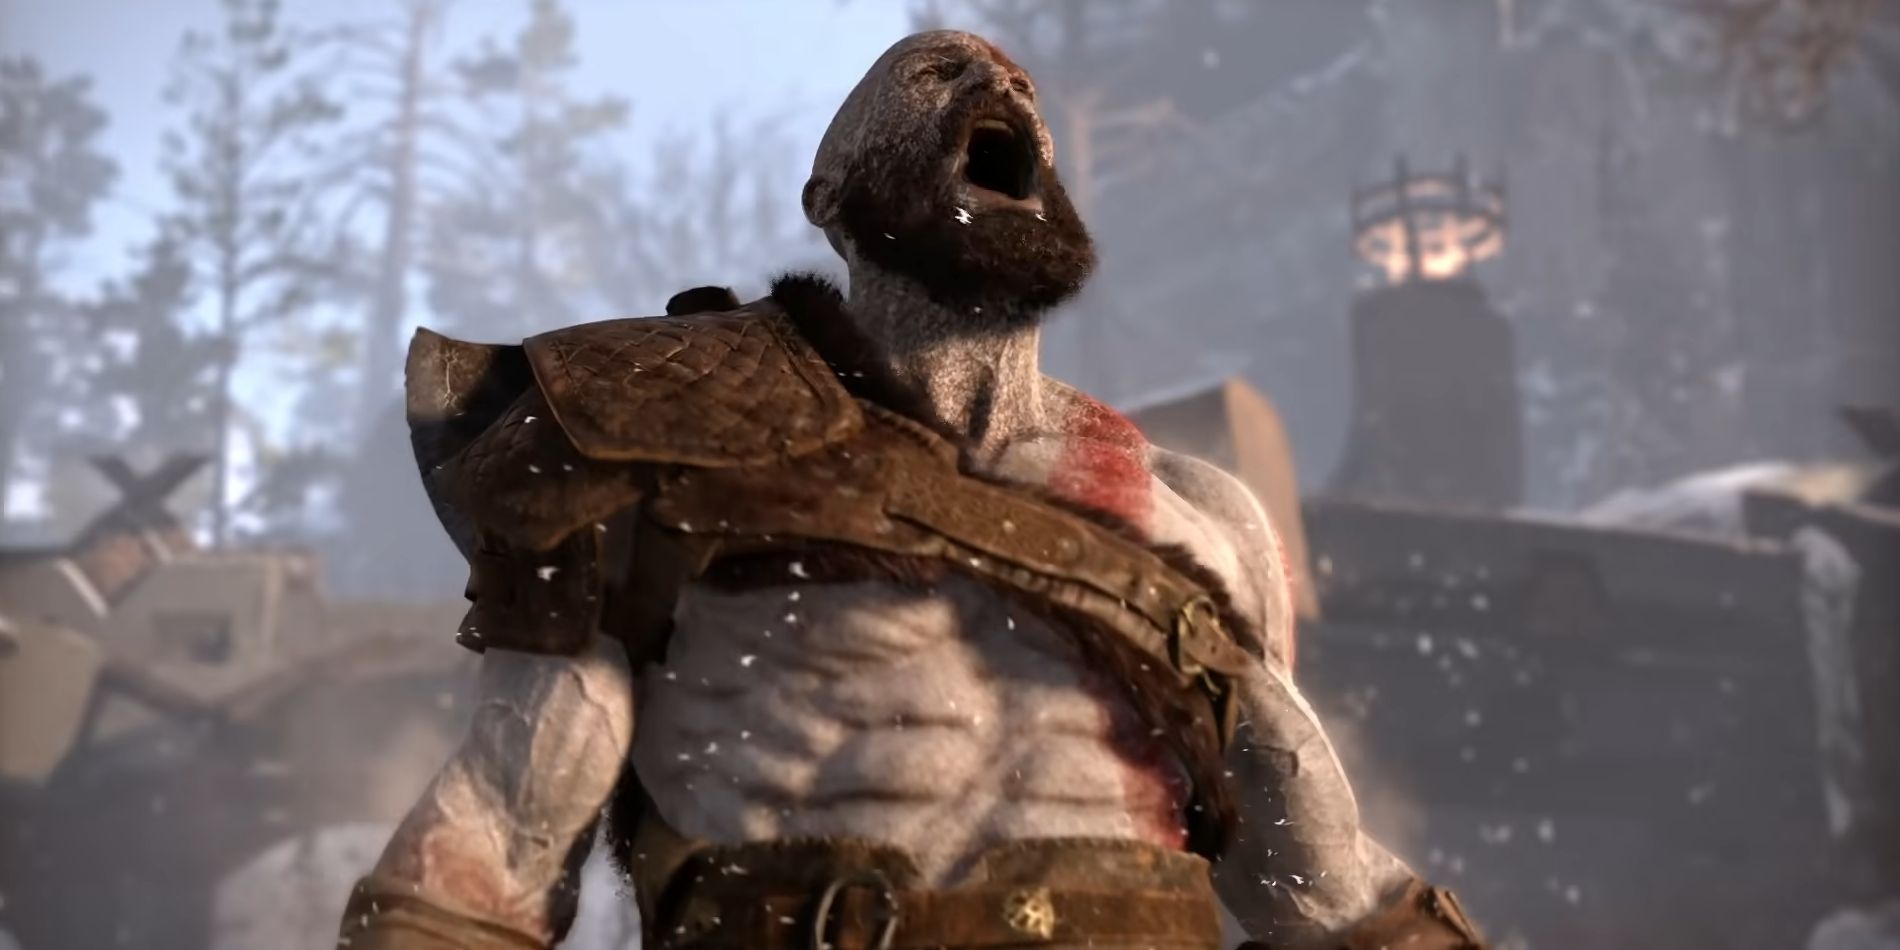 Image of Kratos in God of War (2018) shouting angrily at the sky.